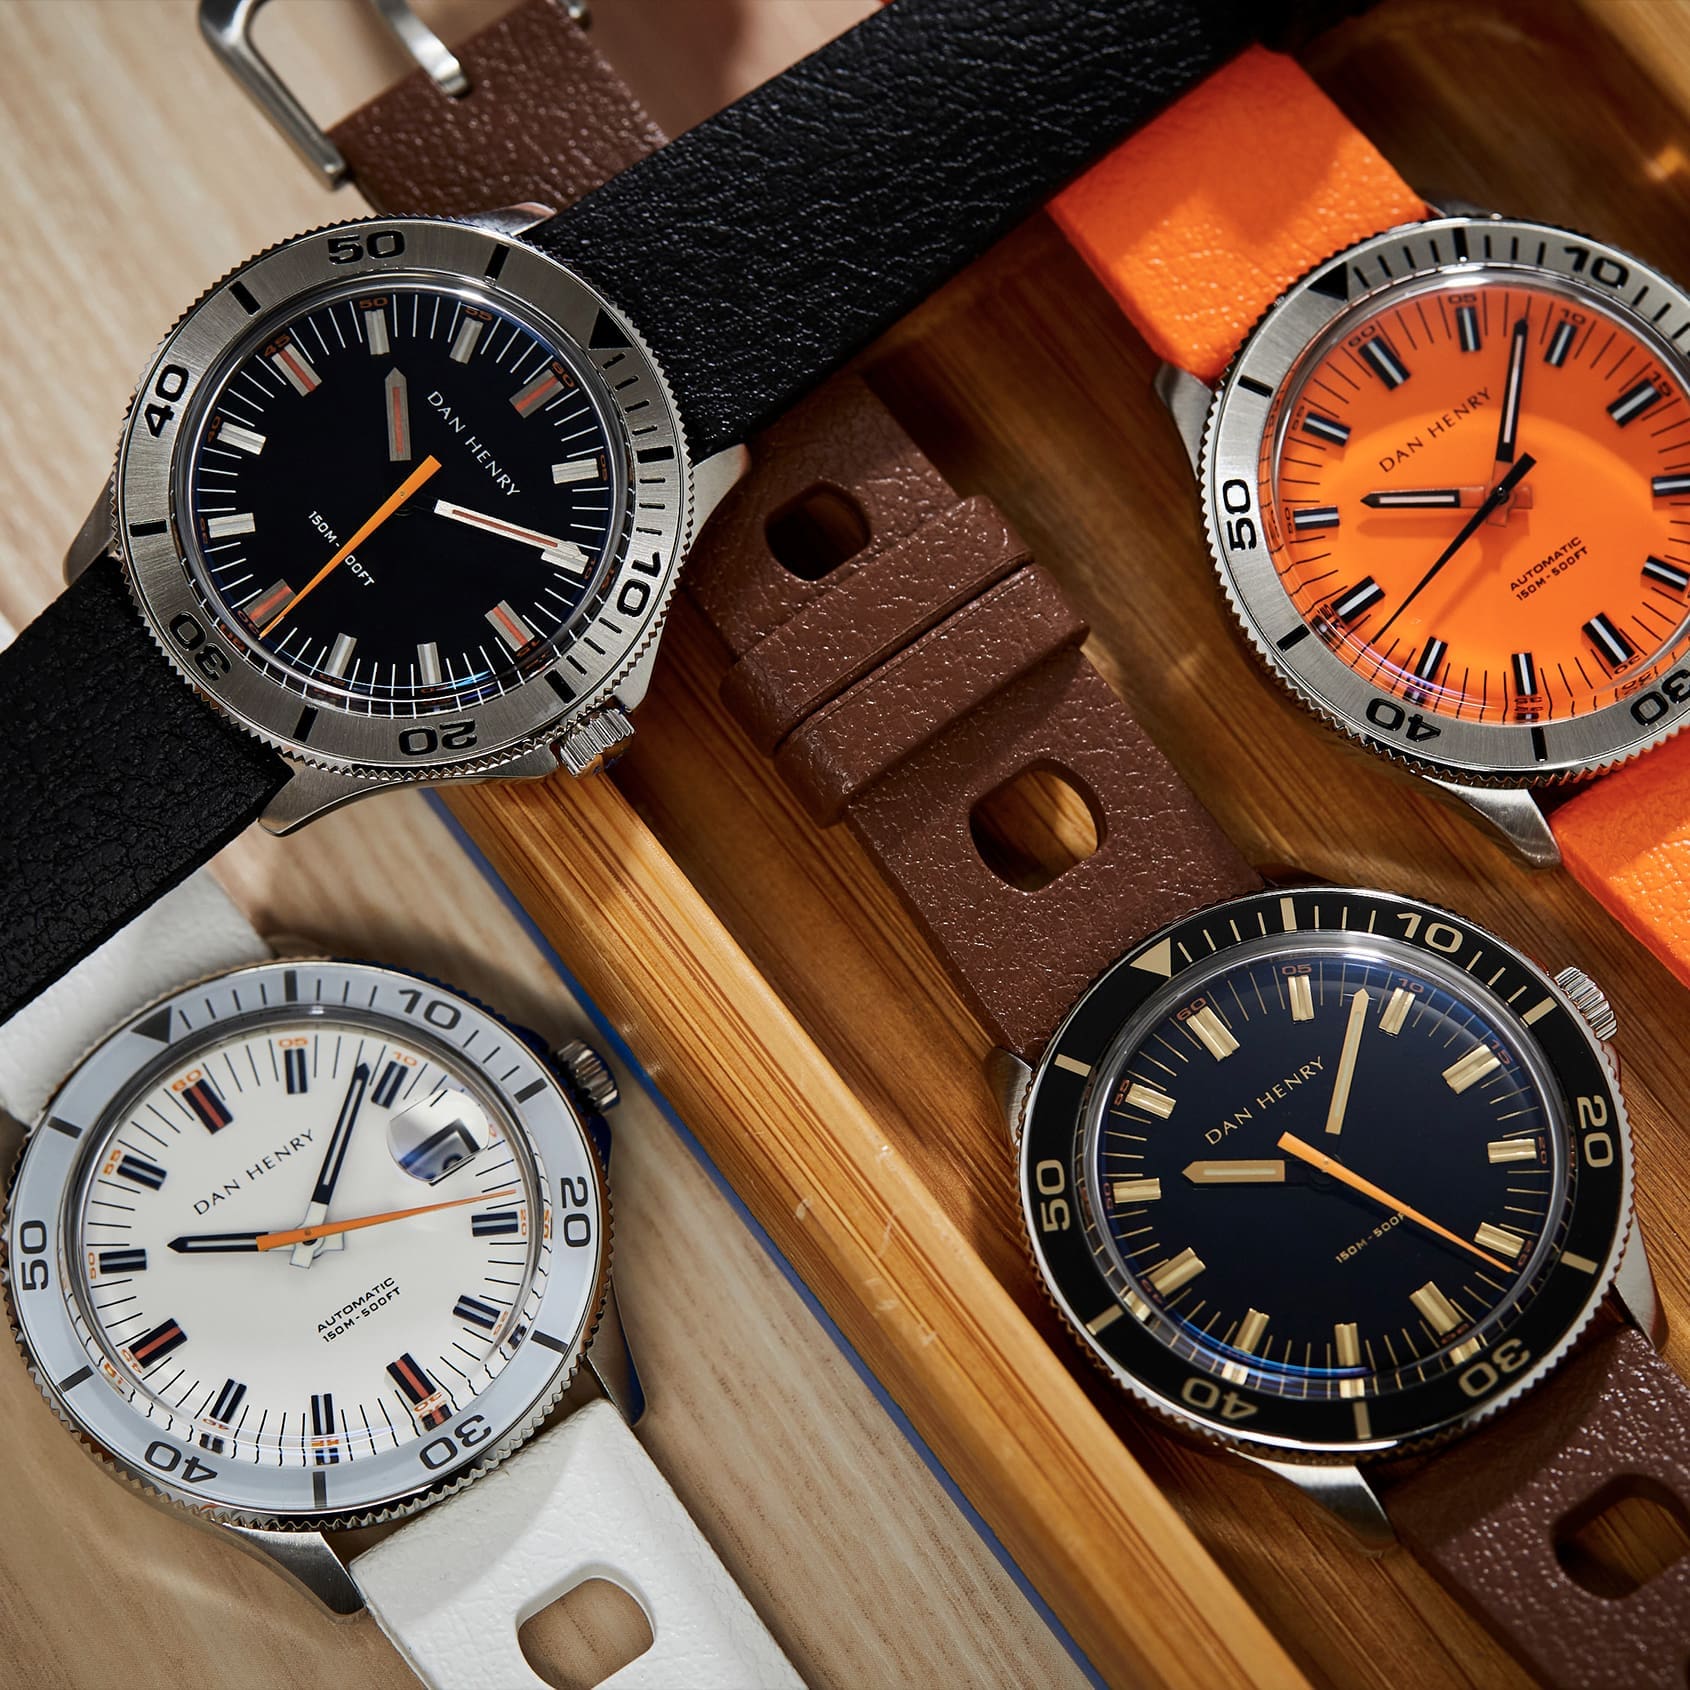 HANDS-ON: The Dan Henry 1975 is a diver that’s playful yet refined and costs under $300